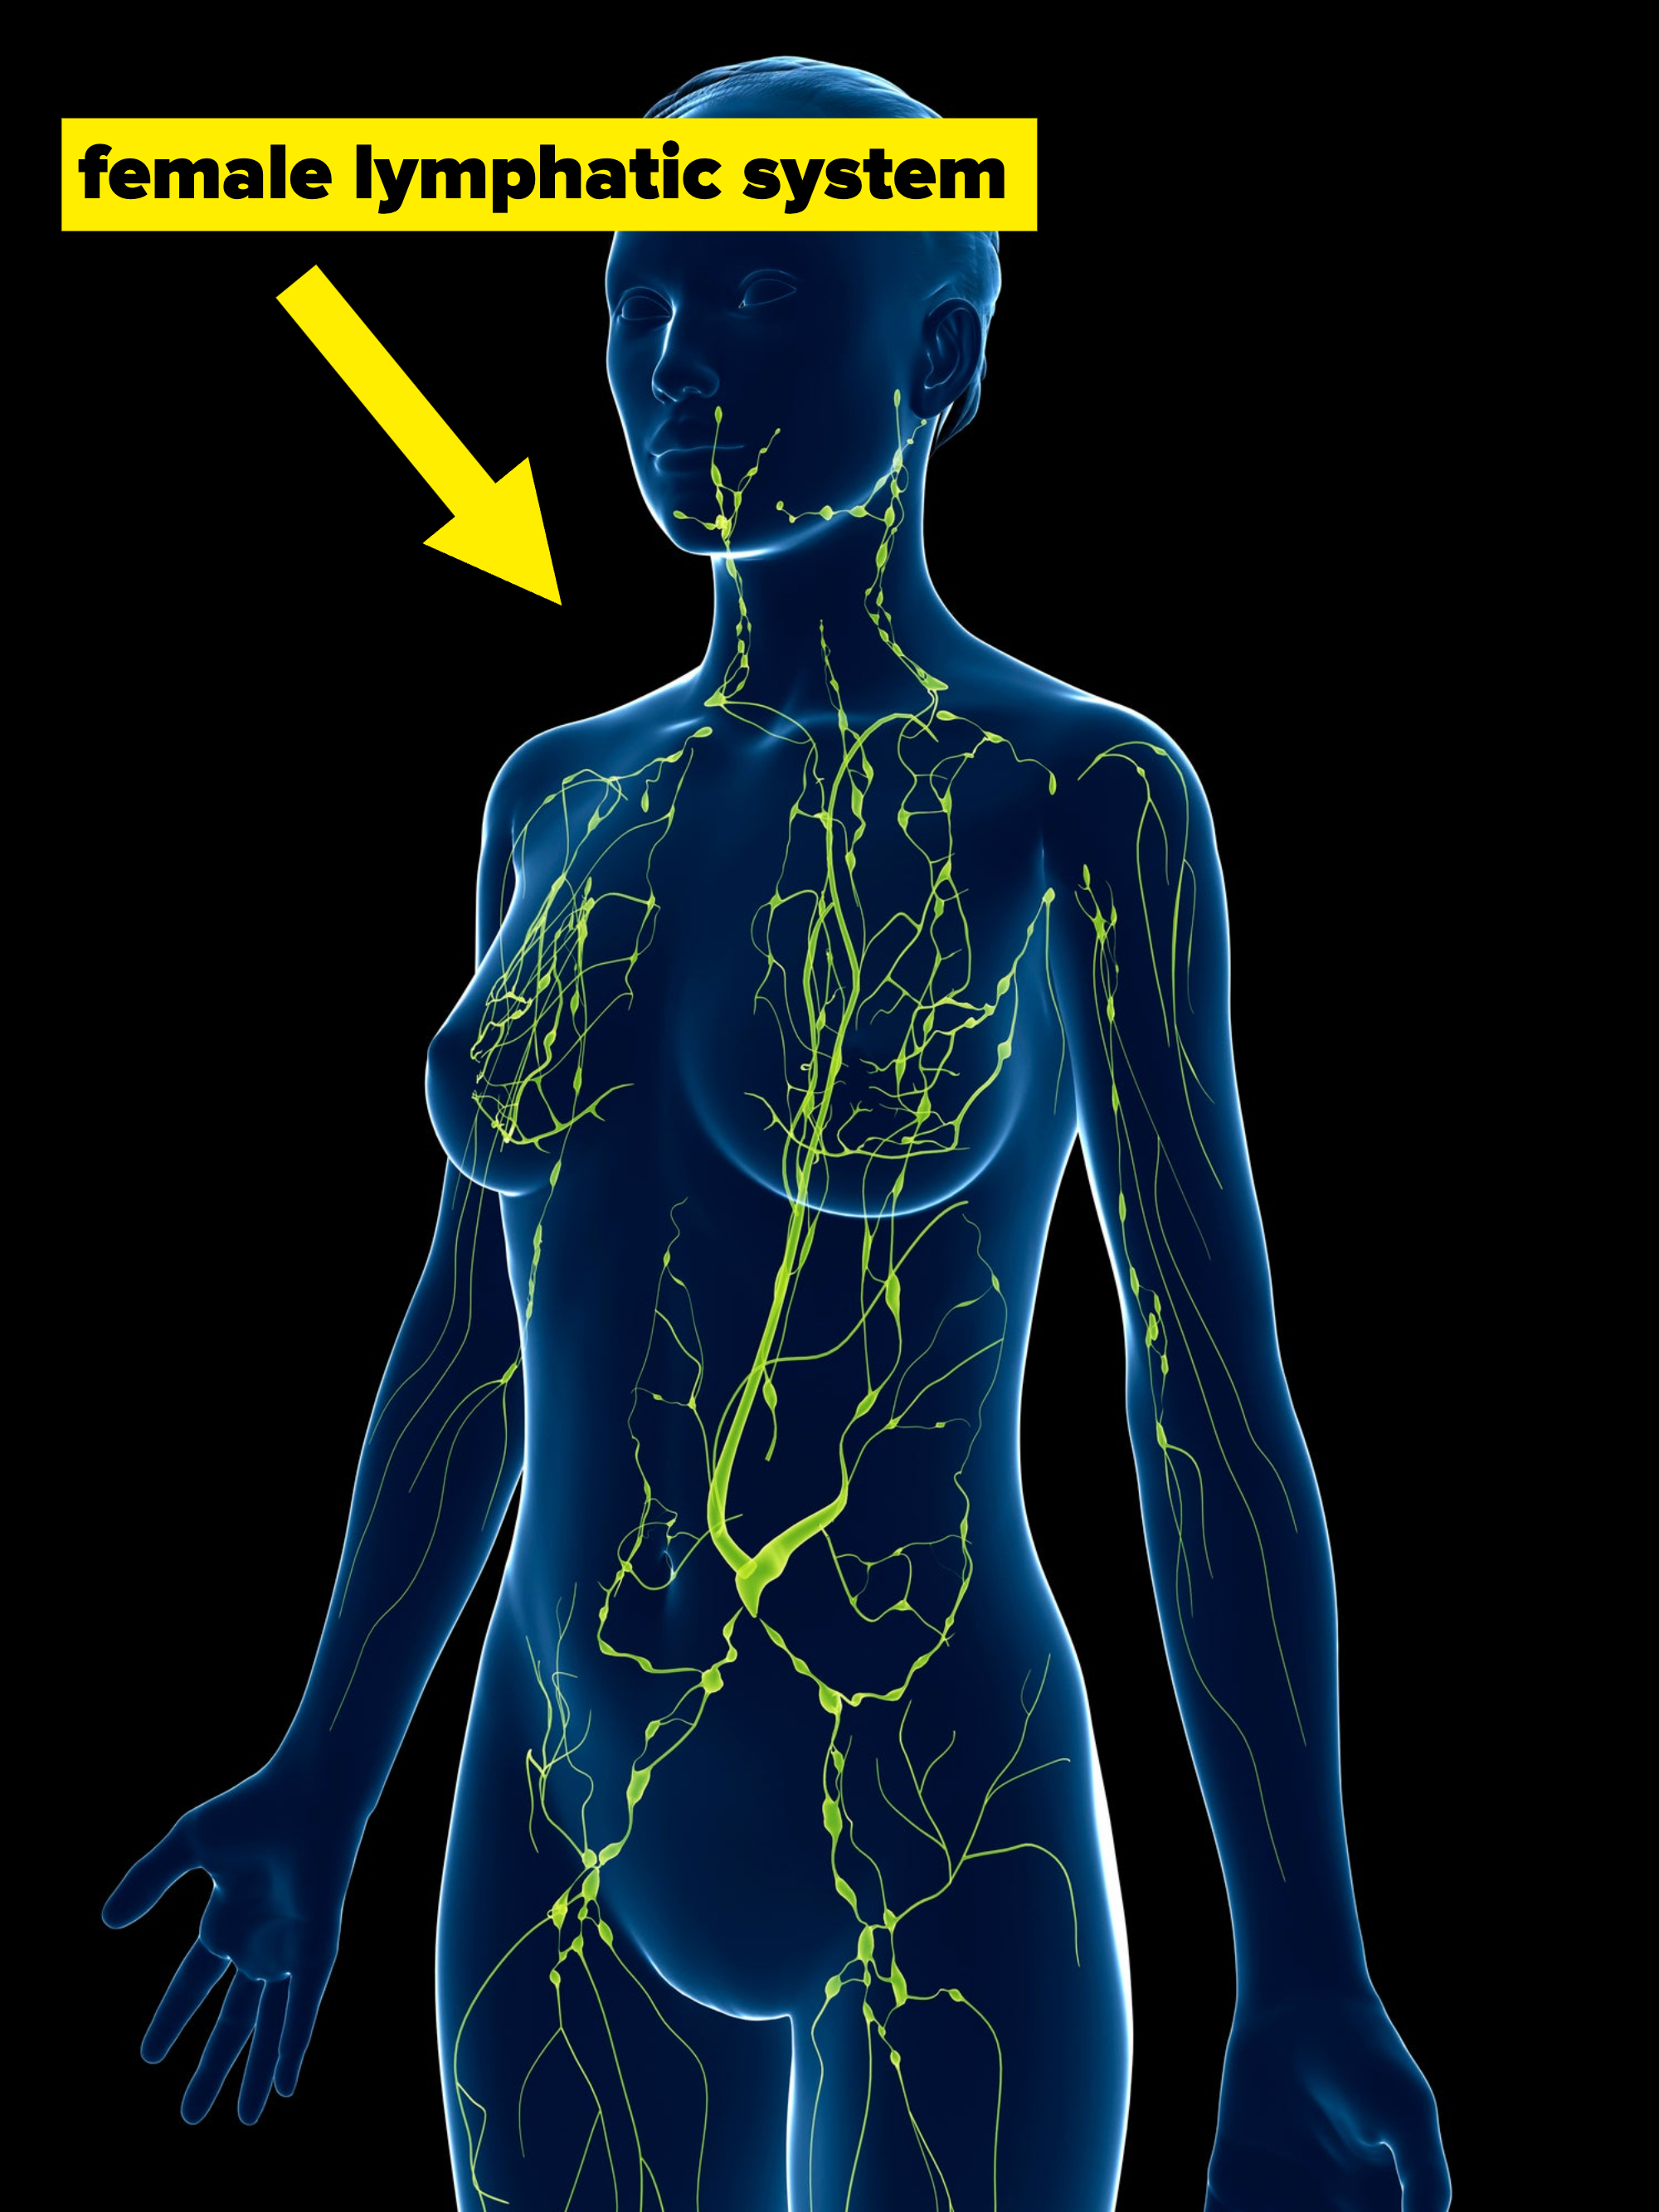 Illustration of female lymphatic system with highlighted vessels in a standing figure